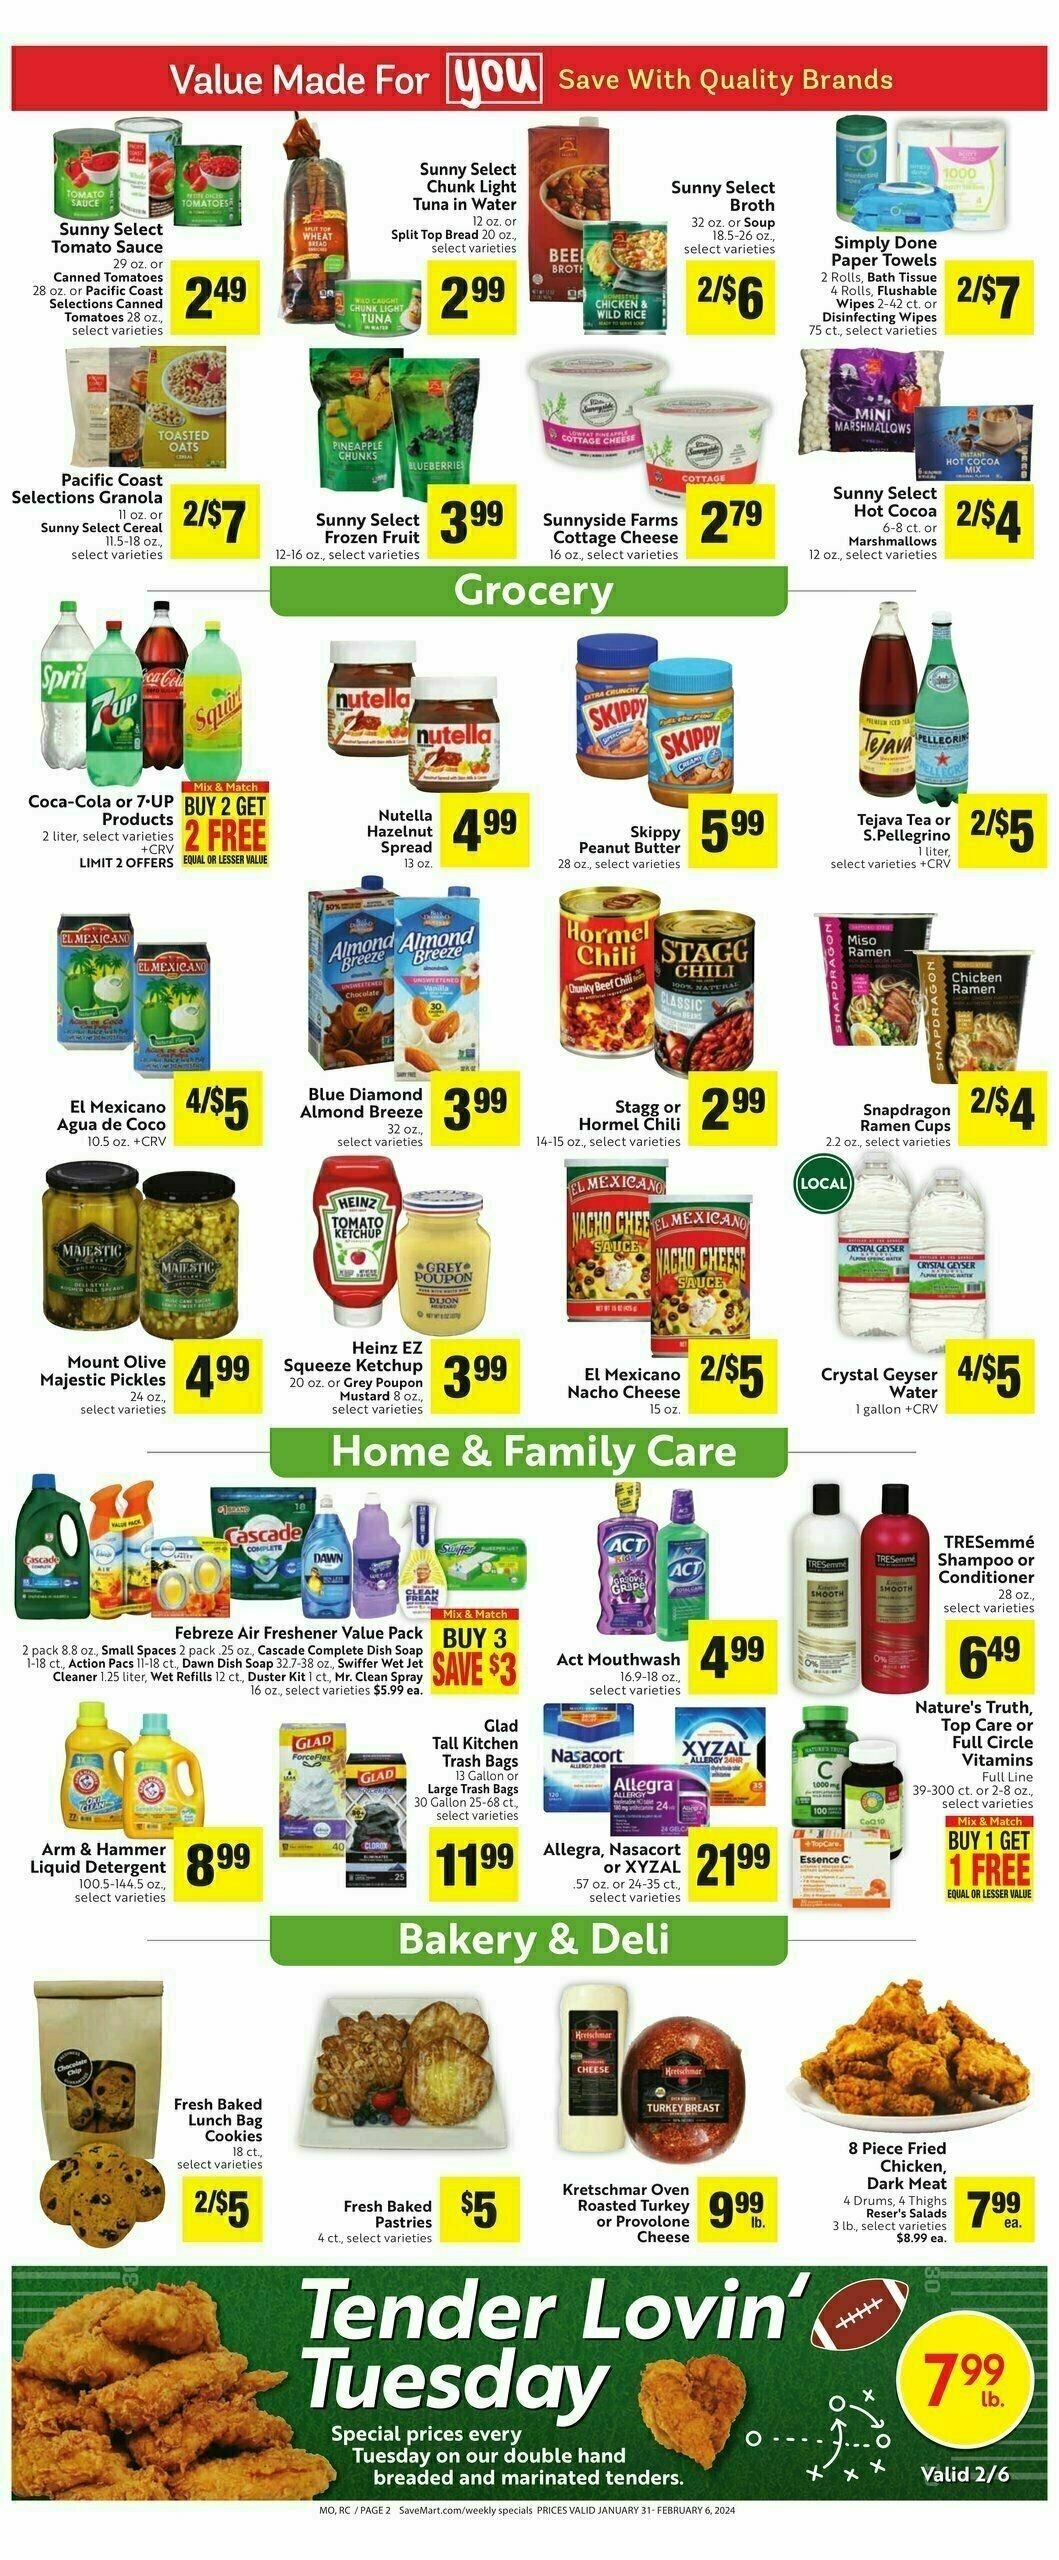 Save Mart Weekly Ad from January 31